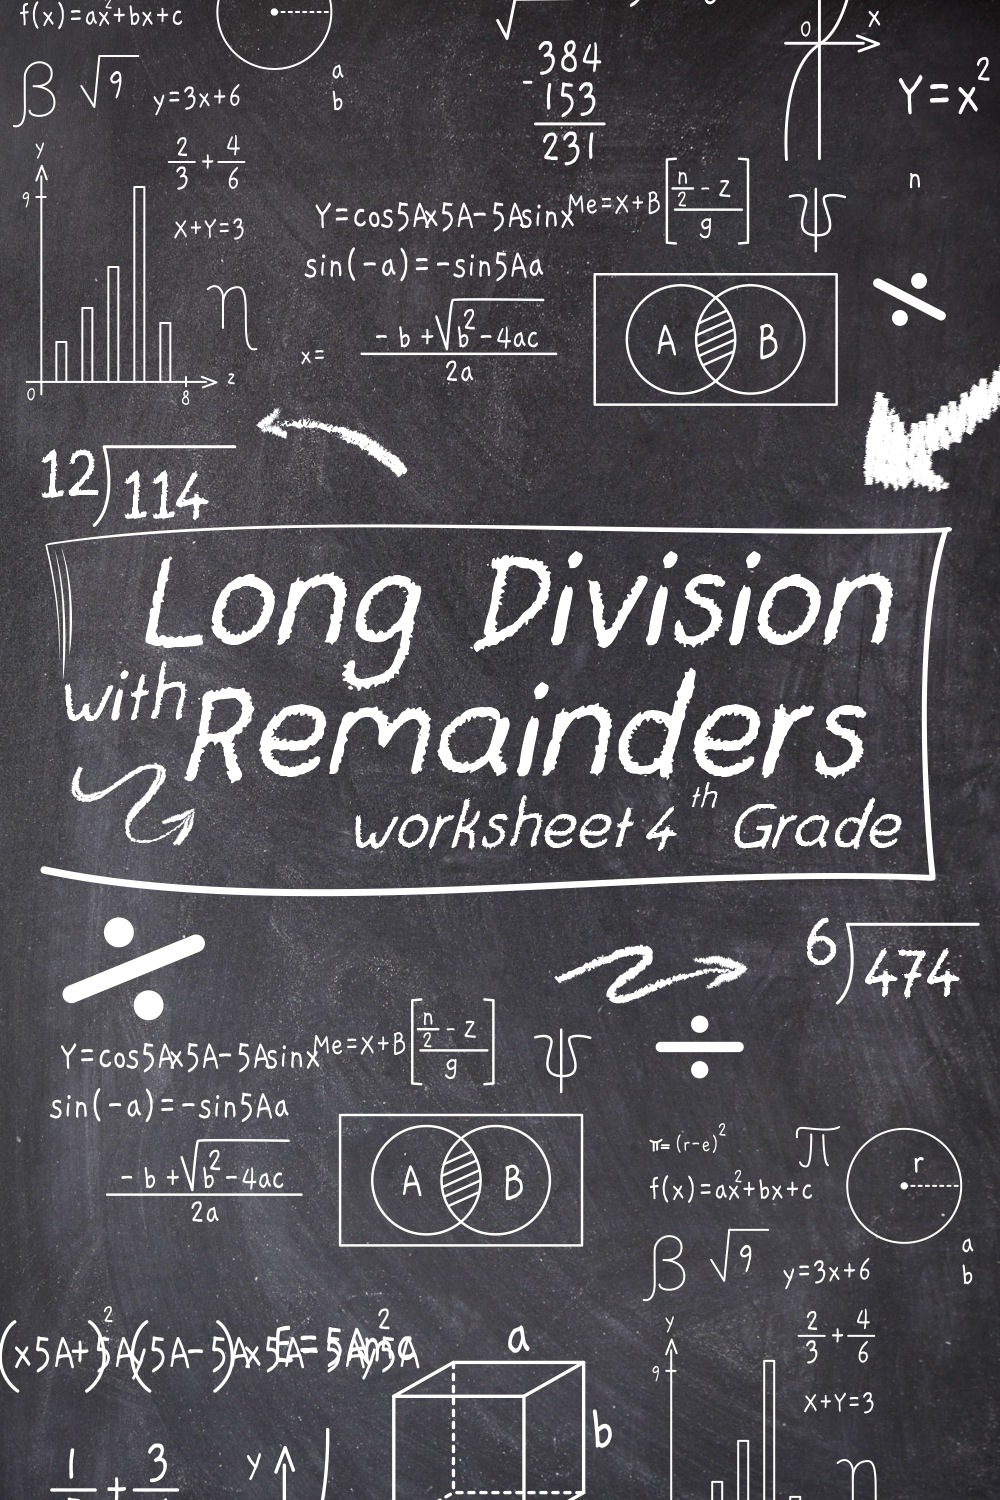 12 Images of Long Division With Remainders Worksheets 4th Grade